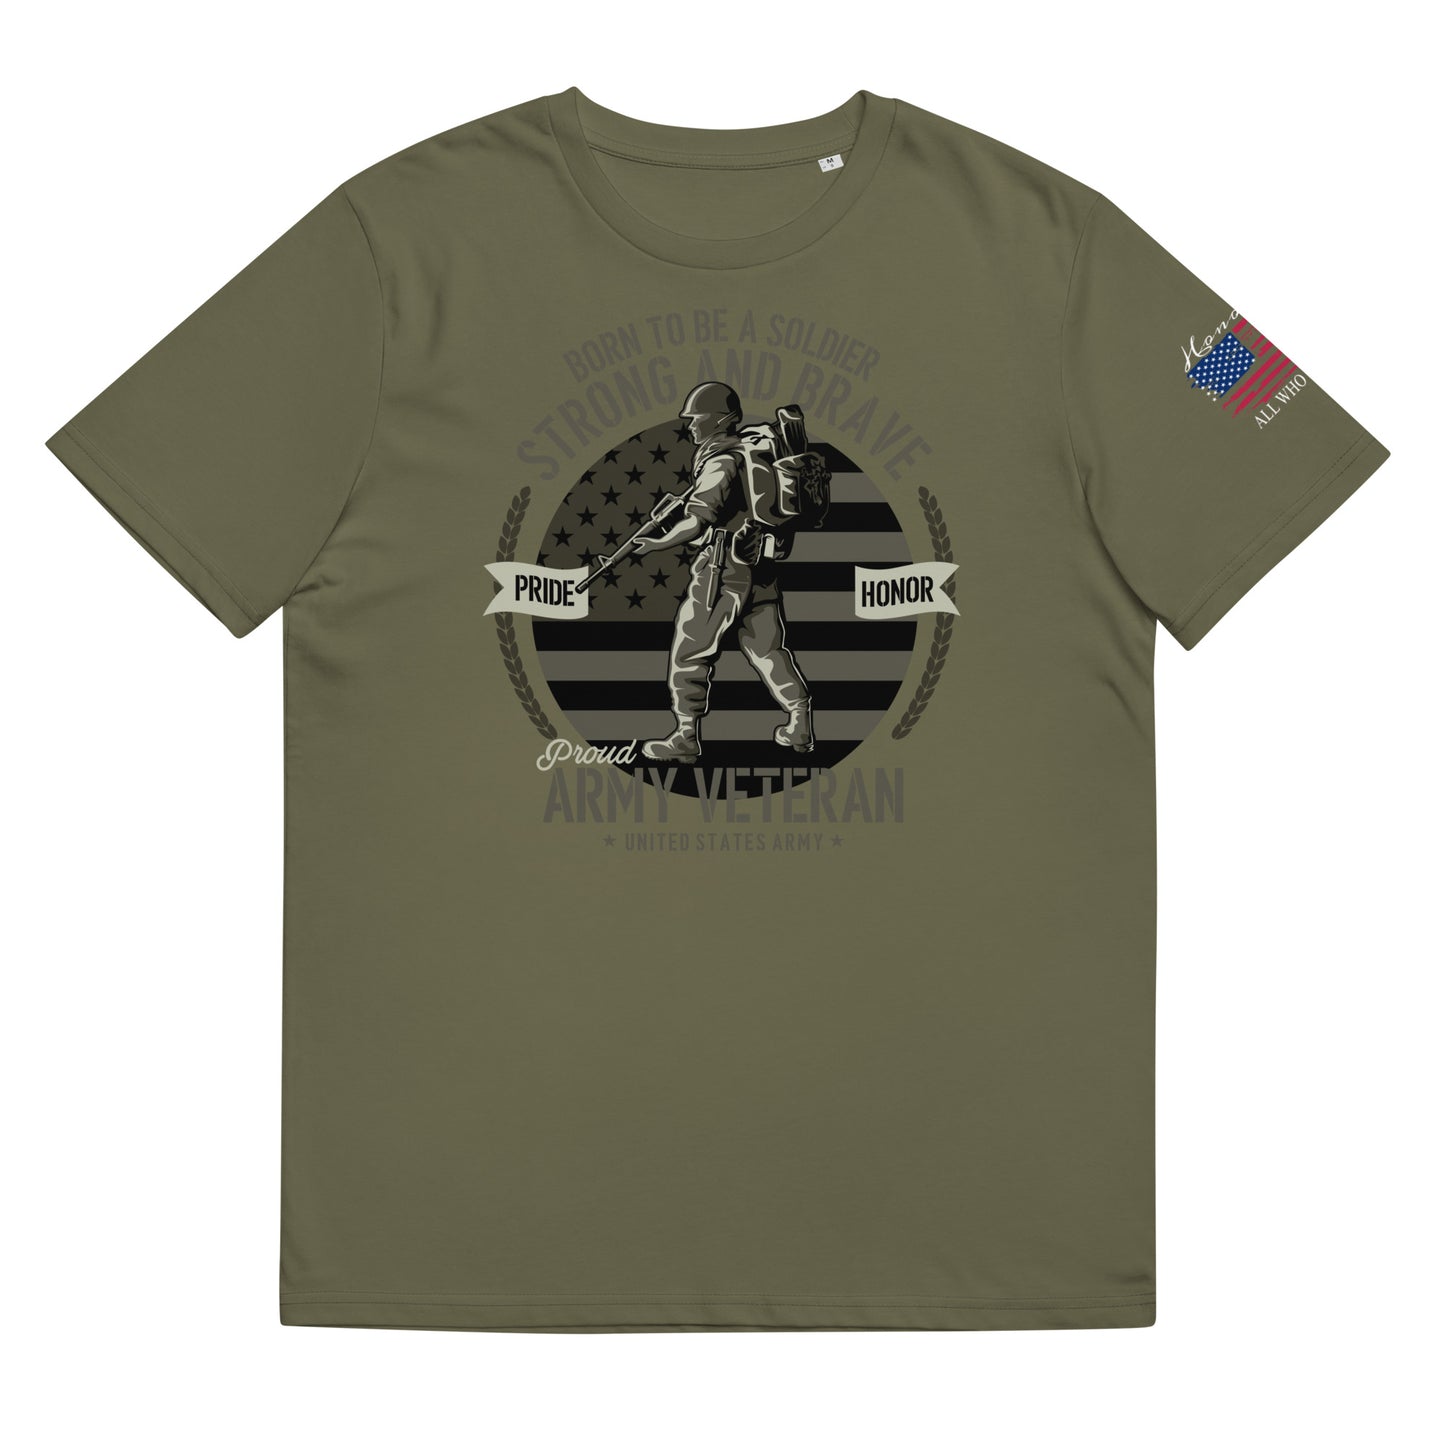 Born to be a soldier Unisex organic cotton t-shirt